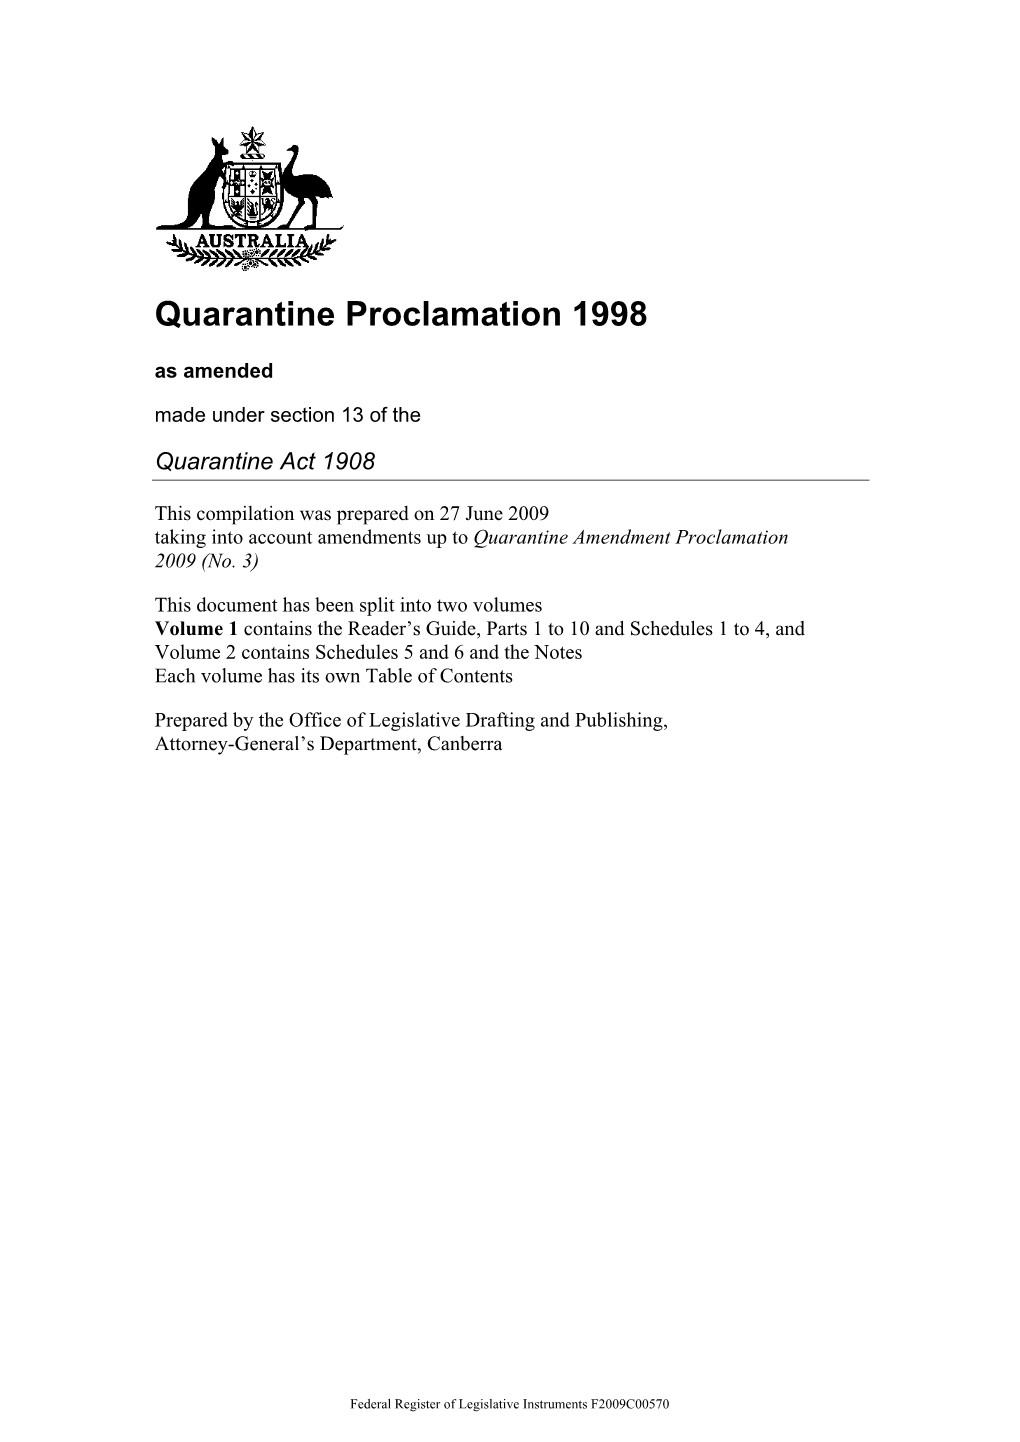 Quarantine Proclamation 1998 As Amended Made Under Section 13 of The